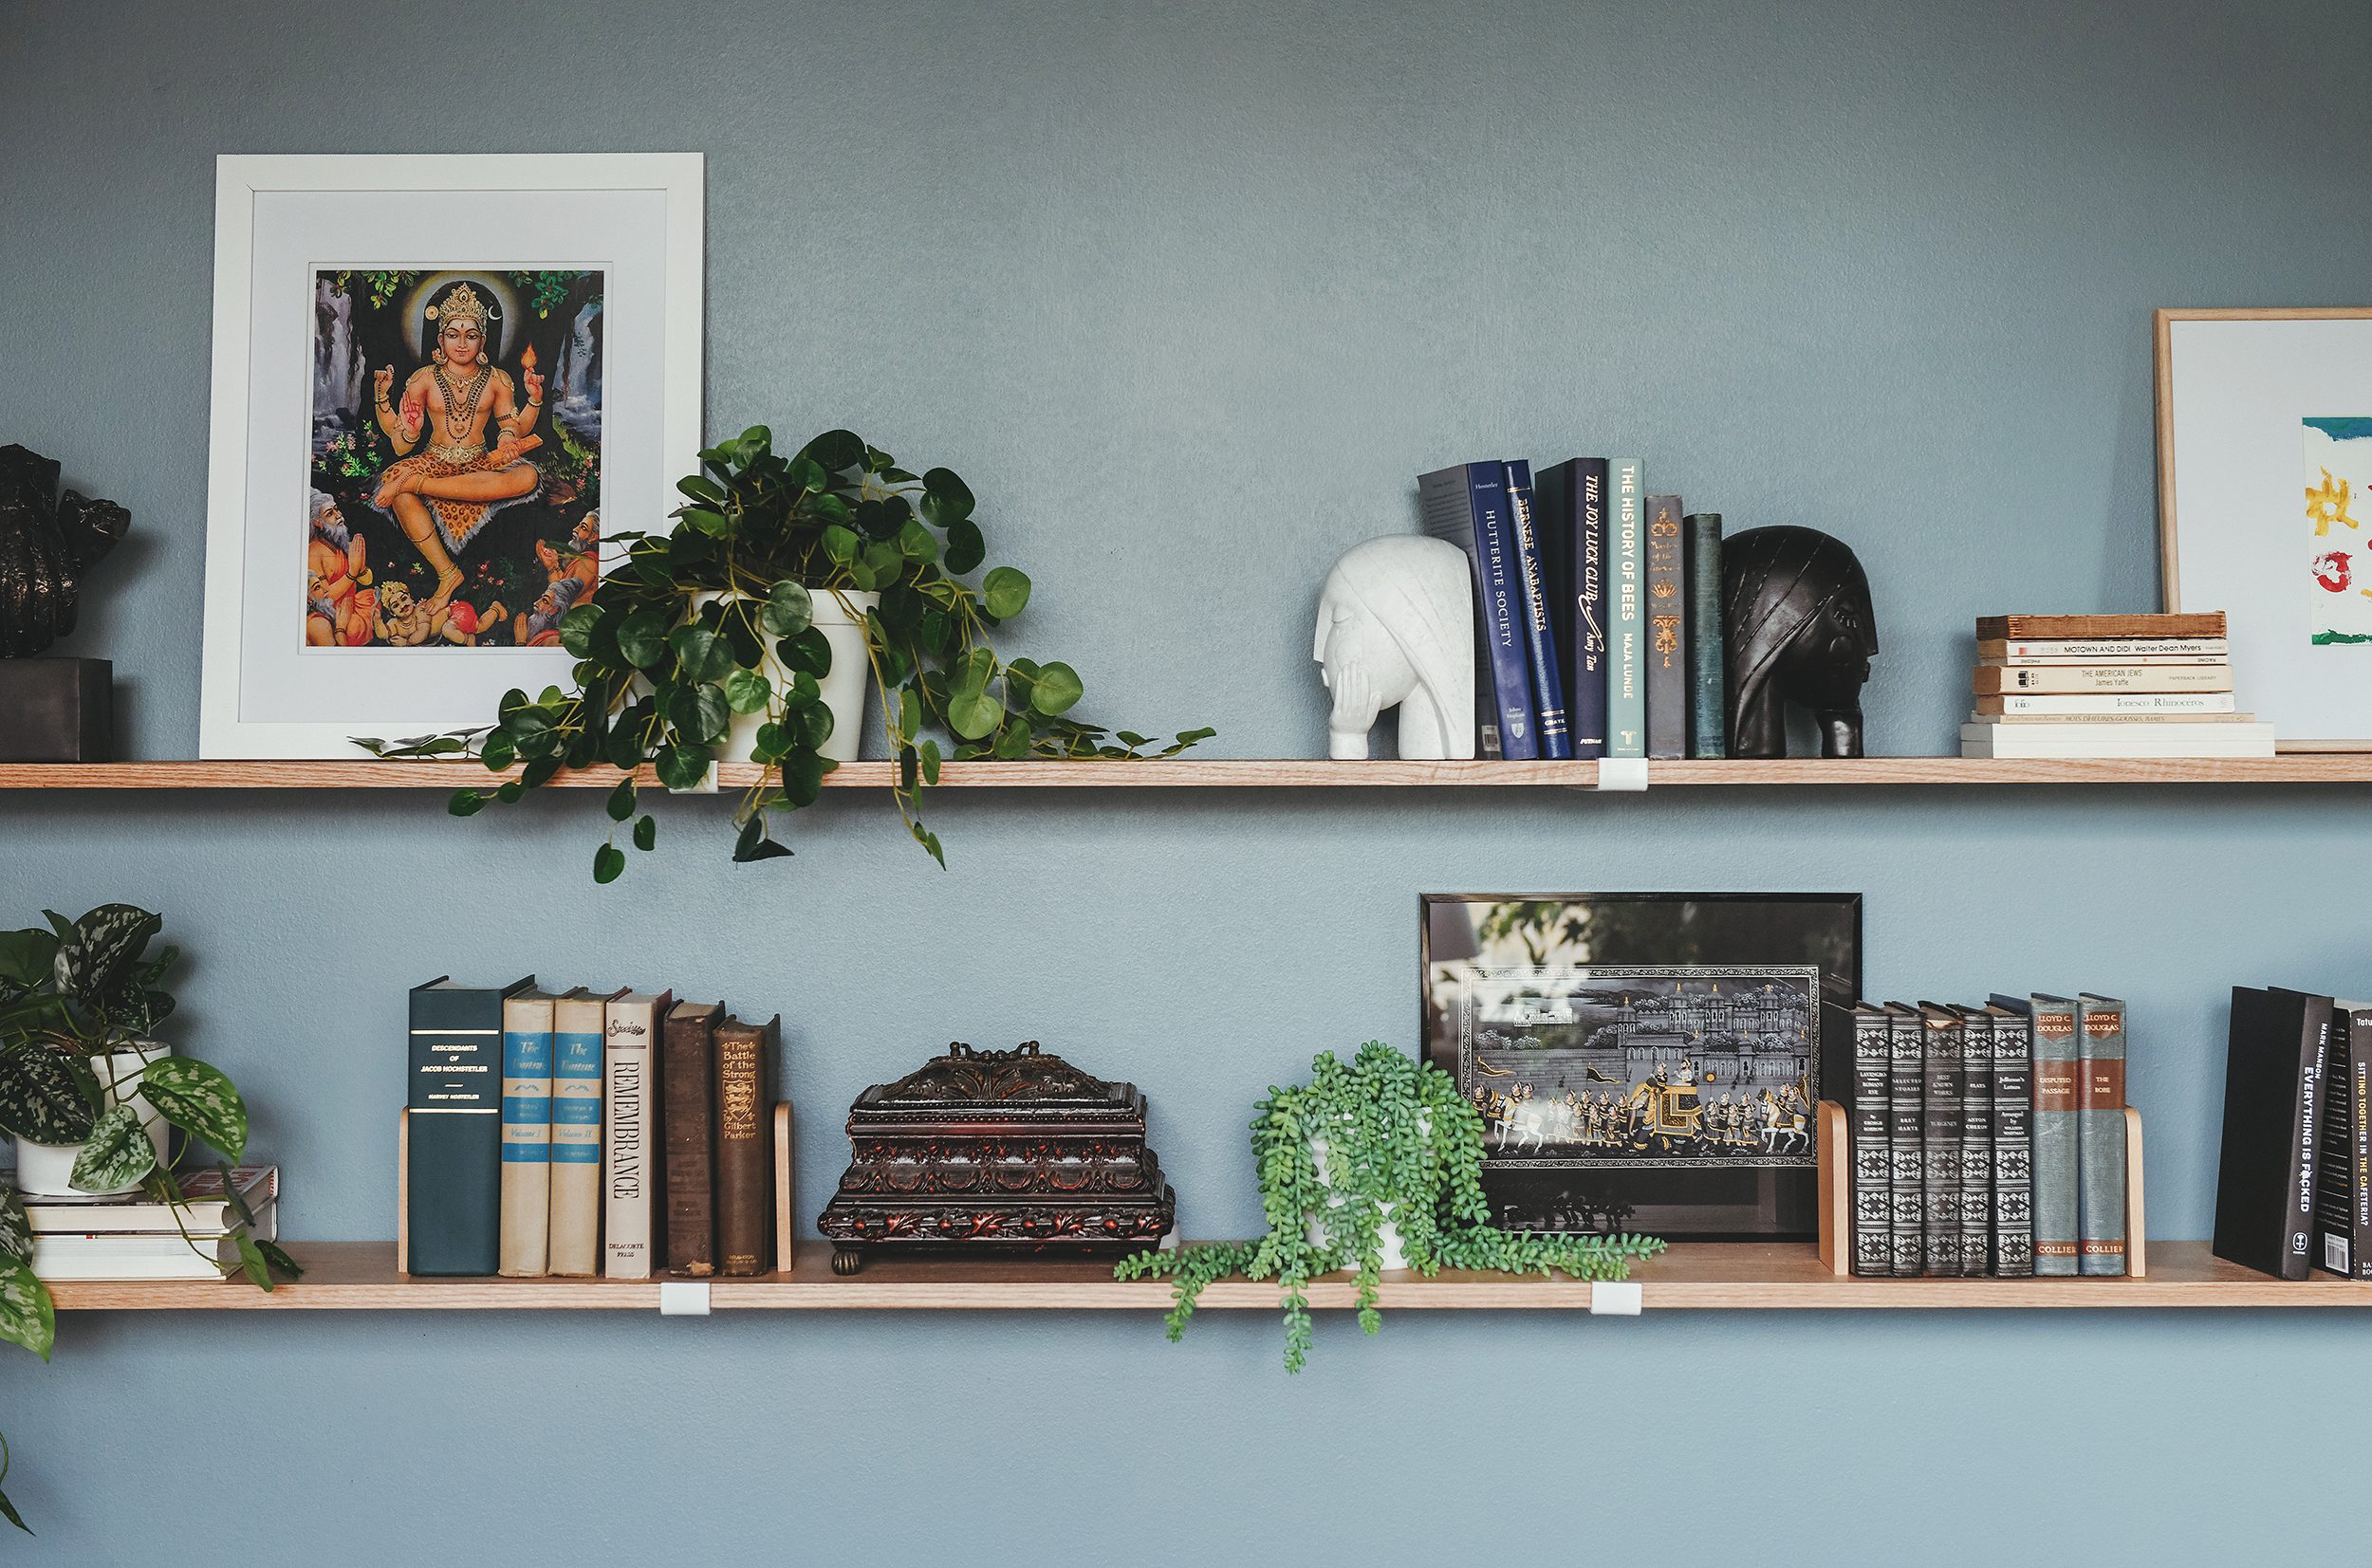 The custom oak shelving is full of books, family memories and found objects // via Yellow Brick Home